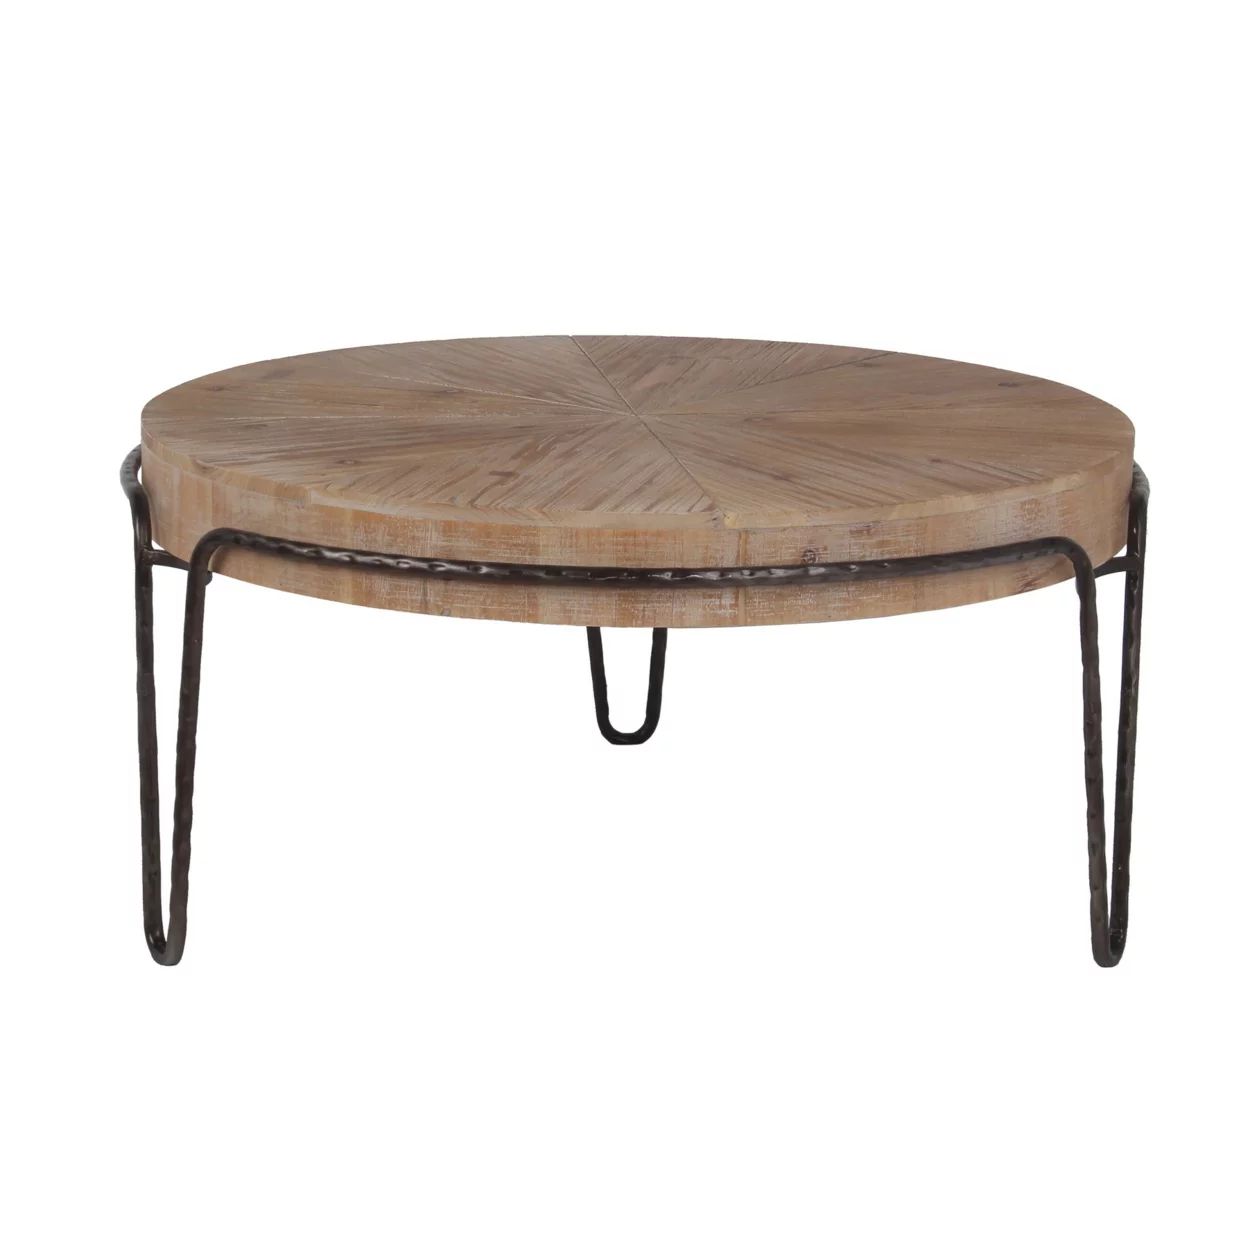 31.5 Inches Wooden Coffee Table with Hairpin Legs, Brown and Black- Saltoro Sherpi | Walmart (US)